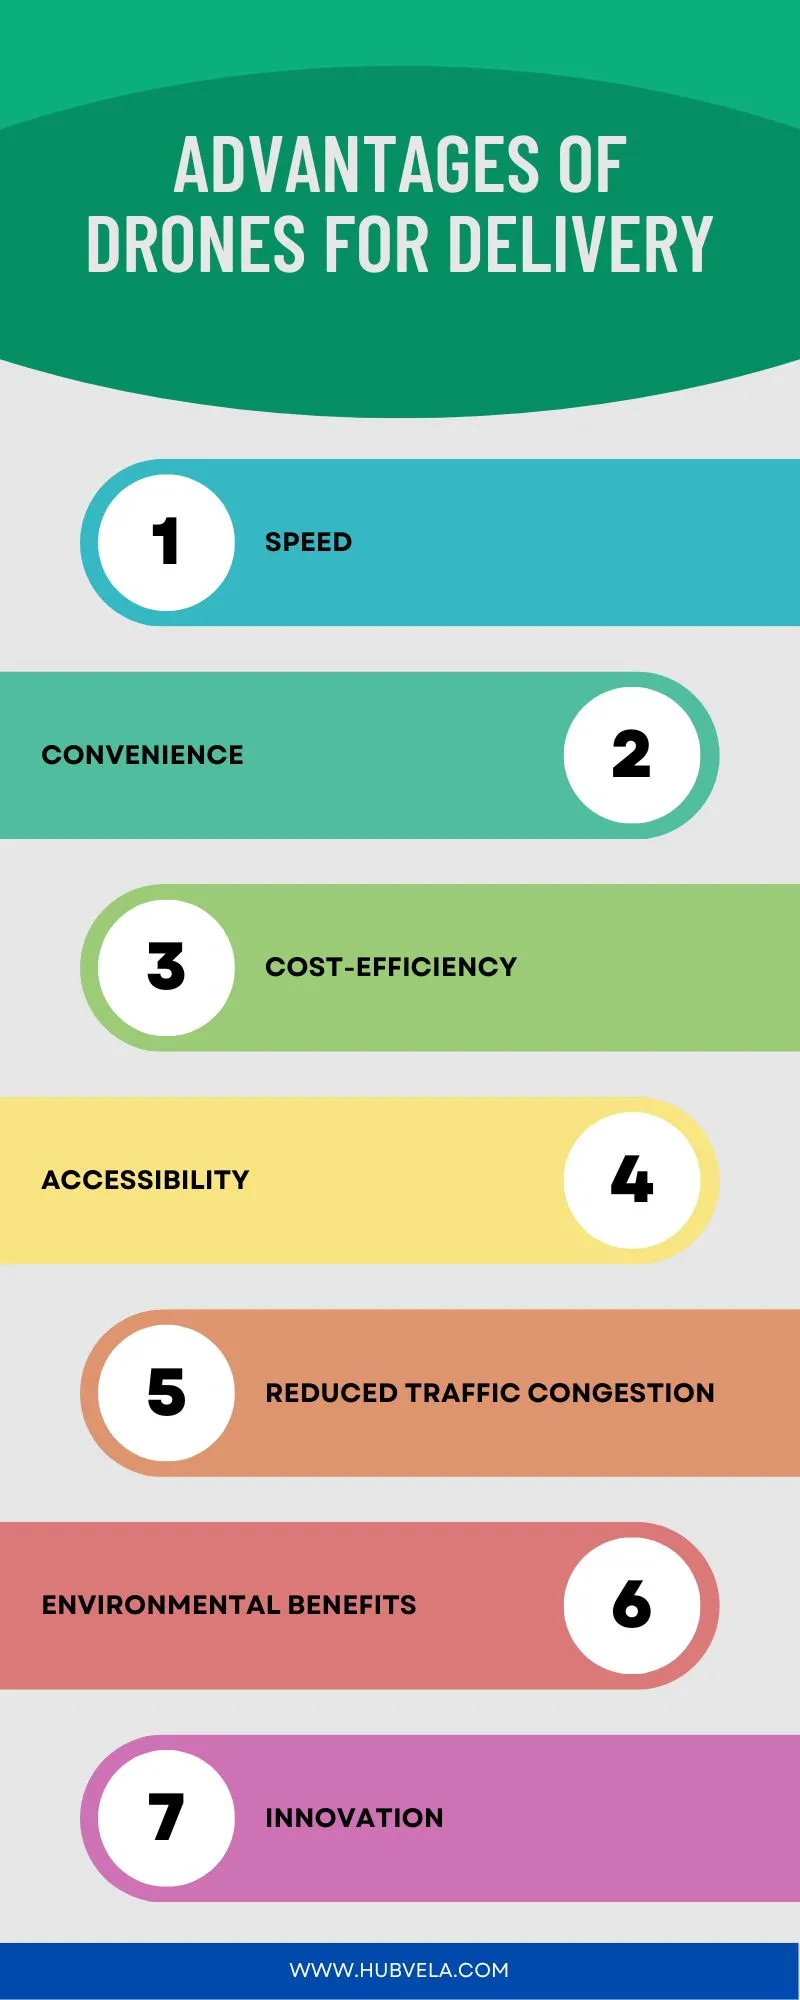 Advantages of Drones for Delivery Infographic